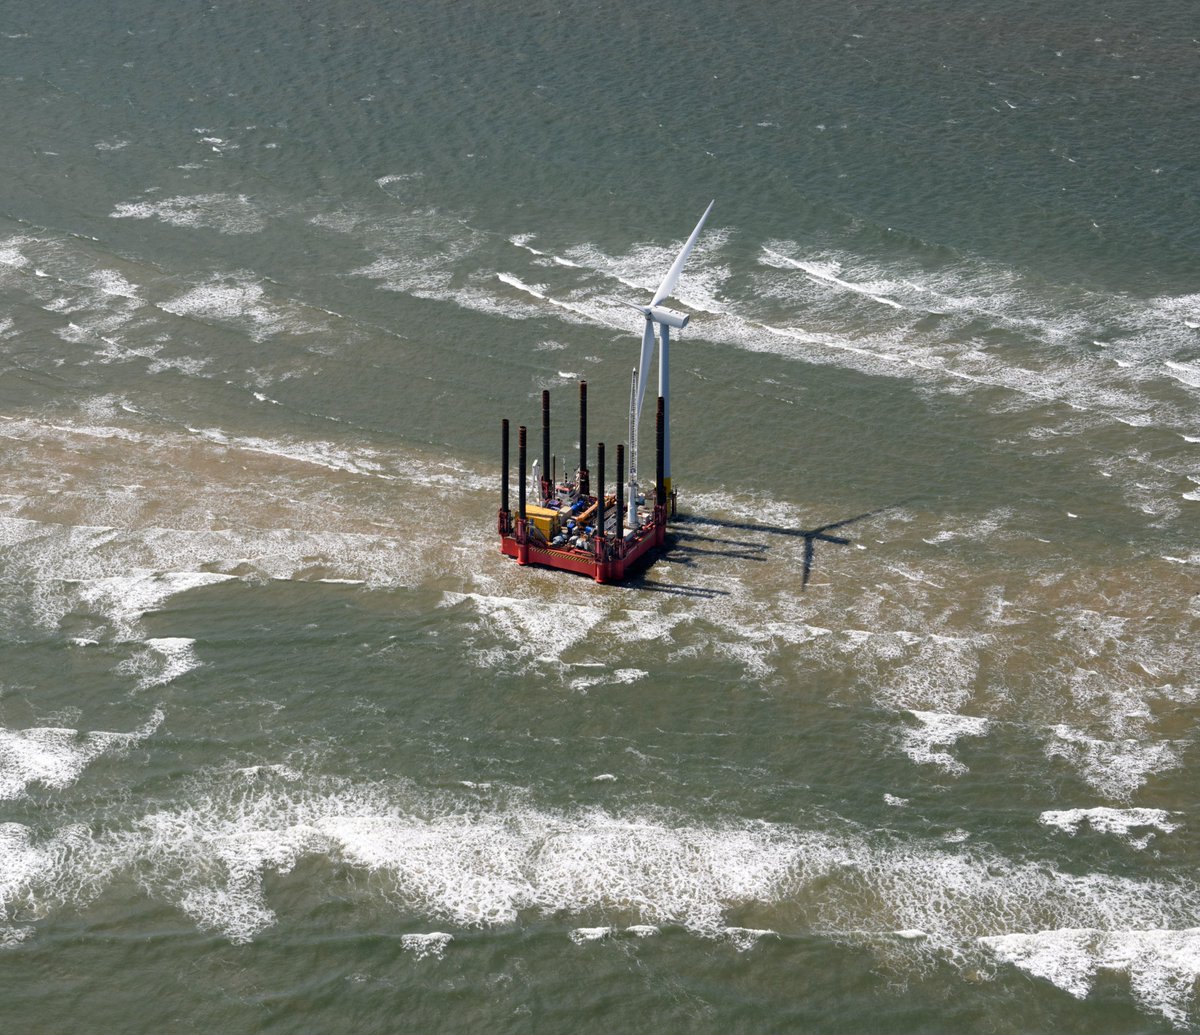 Scroby Sands aerial image - WaveWalker 8 legged walking jack-up barge servicing an offshore wind turbine on the Scroby Sands off Great Yarmouth #ScrobySands #windfarm #aerial #image #Norfolk #aerialphotography